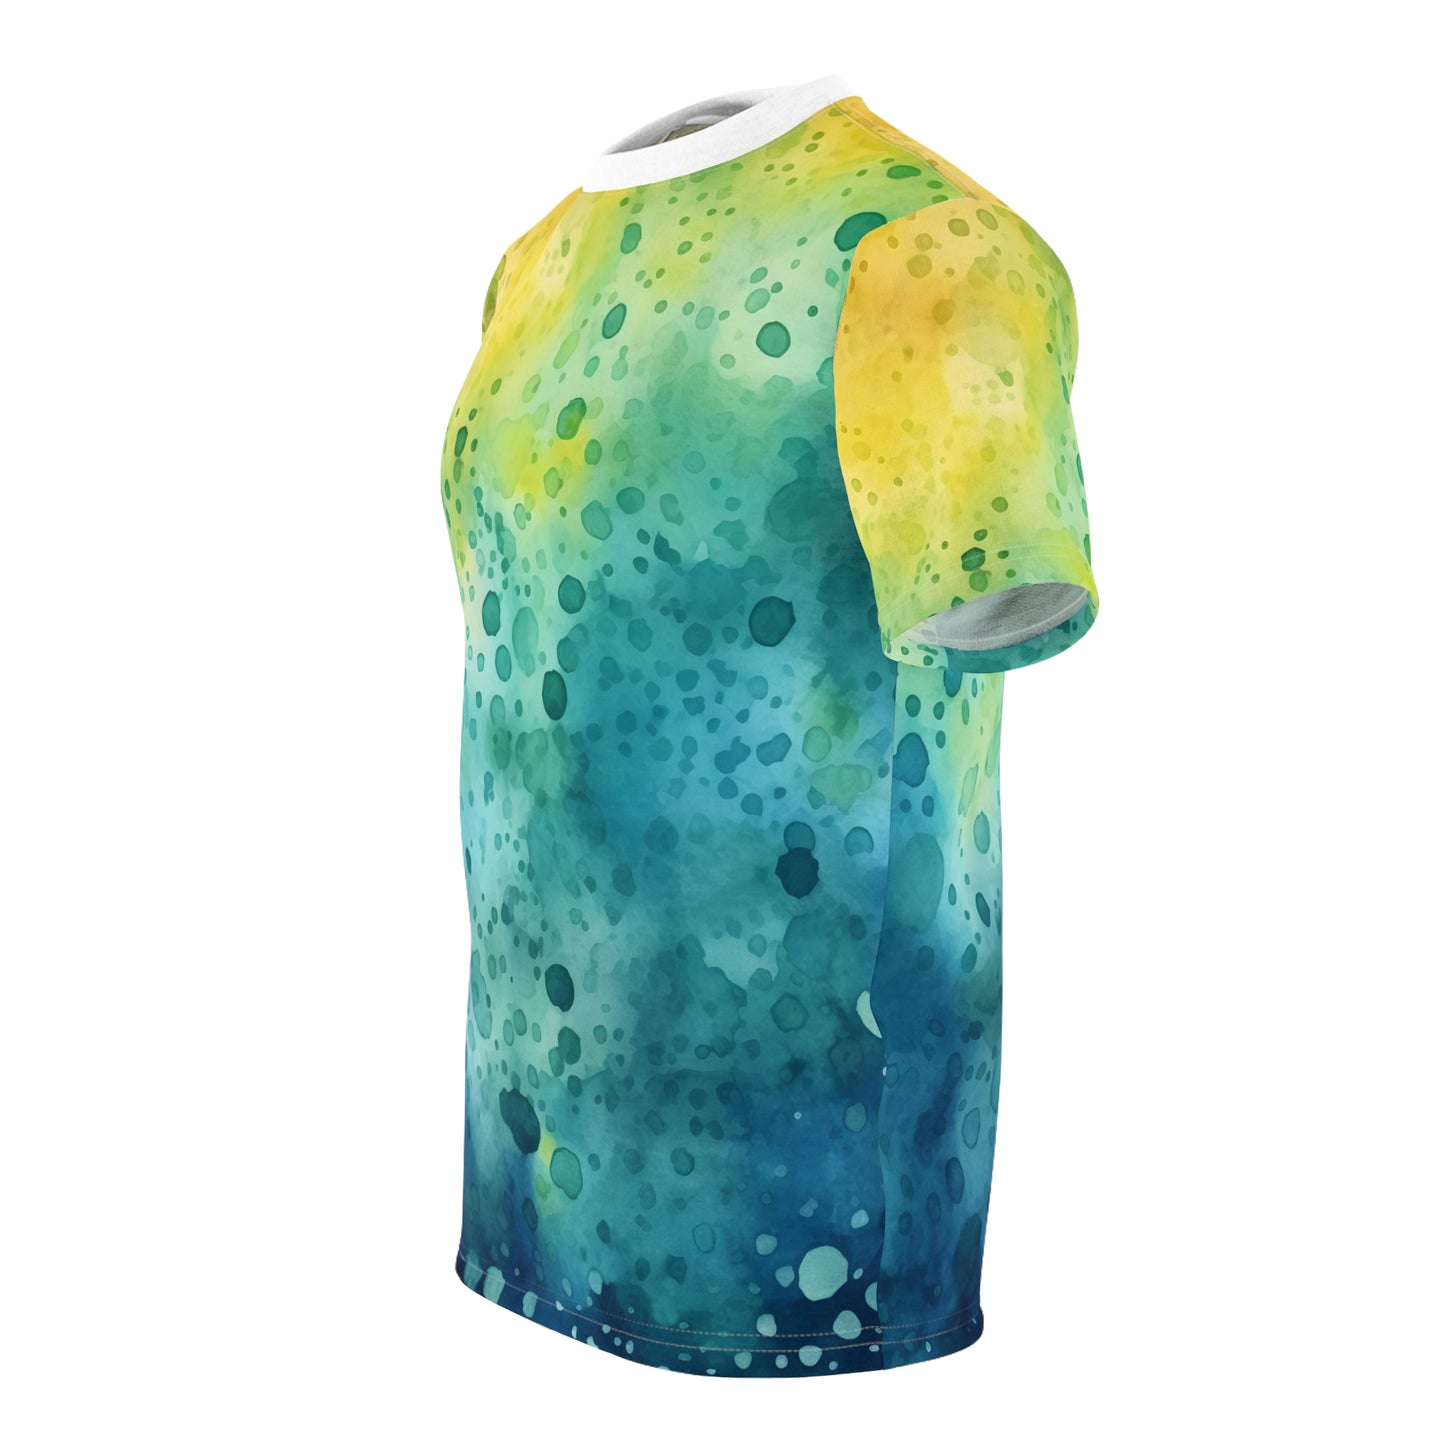 Abstract Style, Colors Design, Bubbles, Unisex Cut & Sew Tee